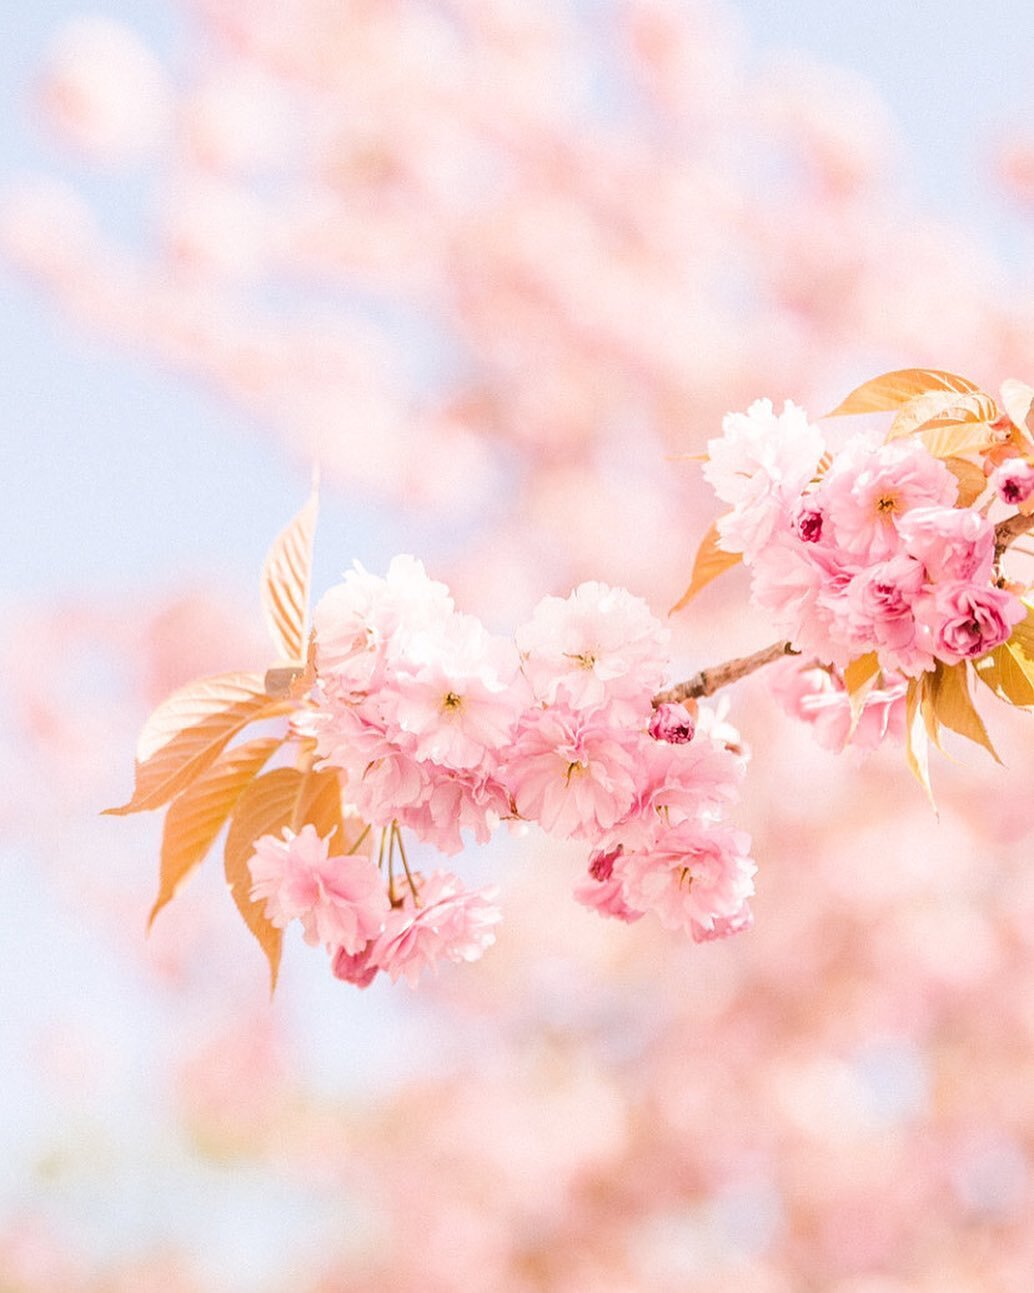 It&rsquo;s that time of year again! We can&rsquo;t wait to capture this year&rsquo;s cherry blossom beauty around the island! 🌸